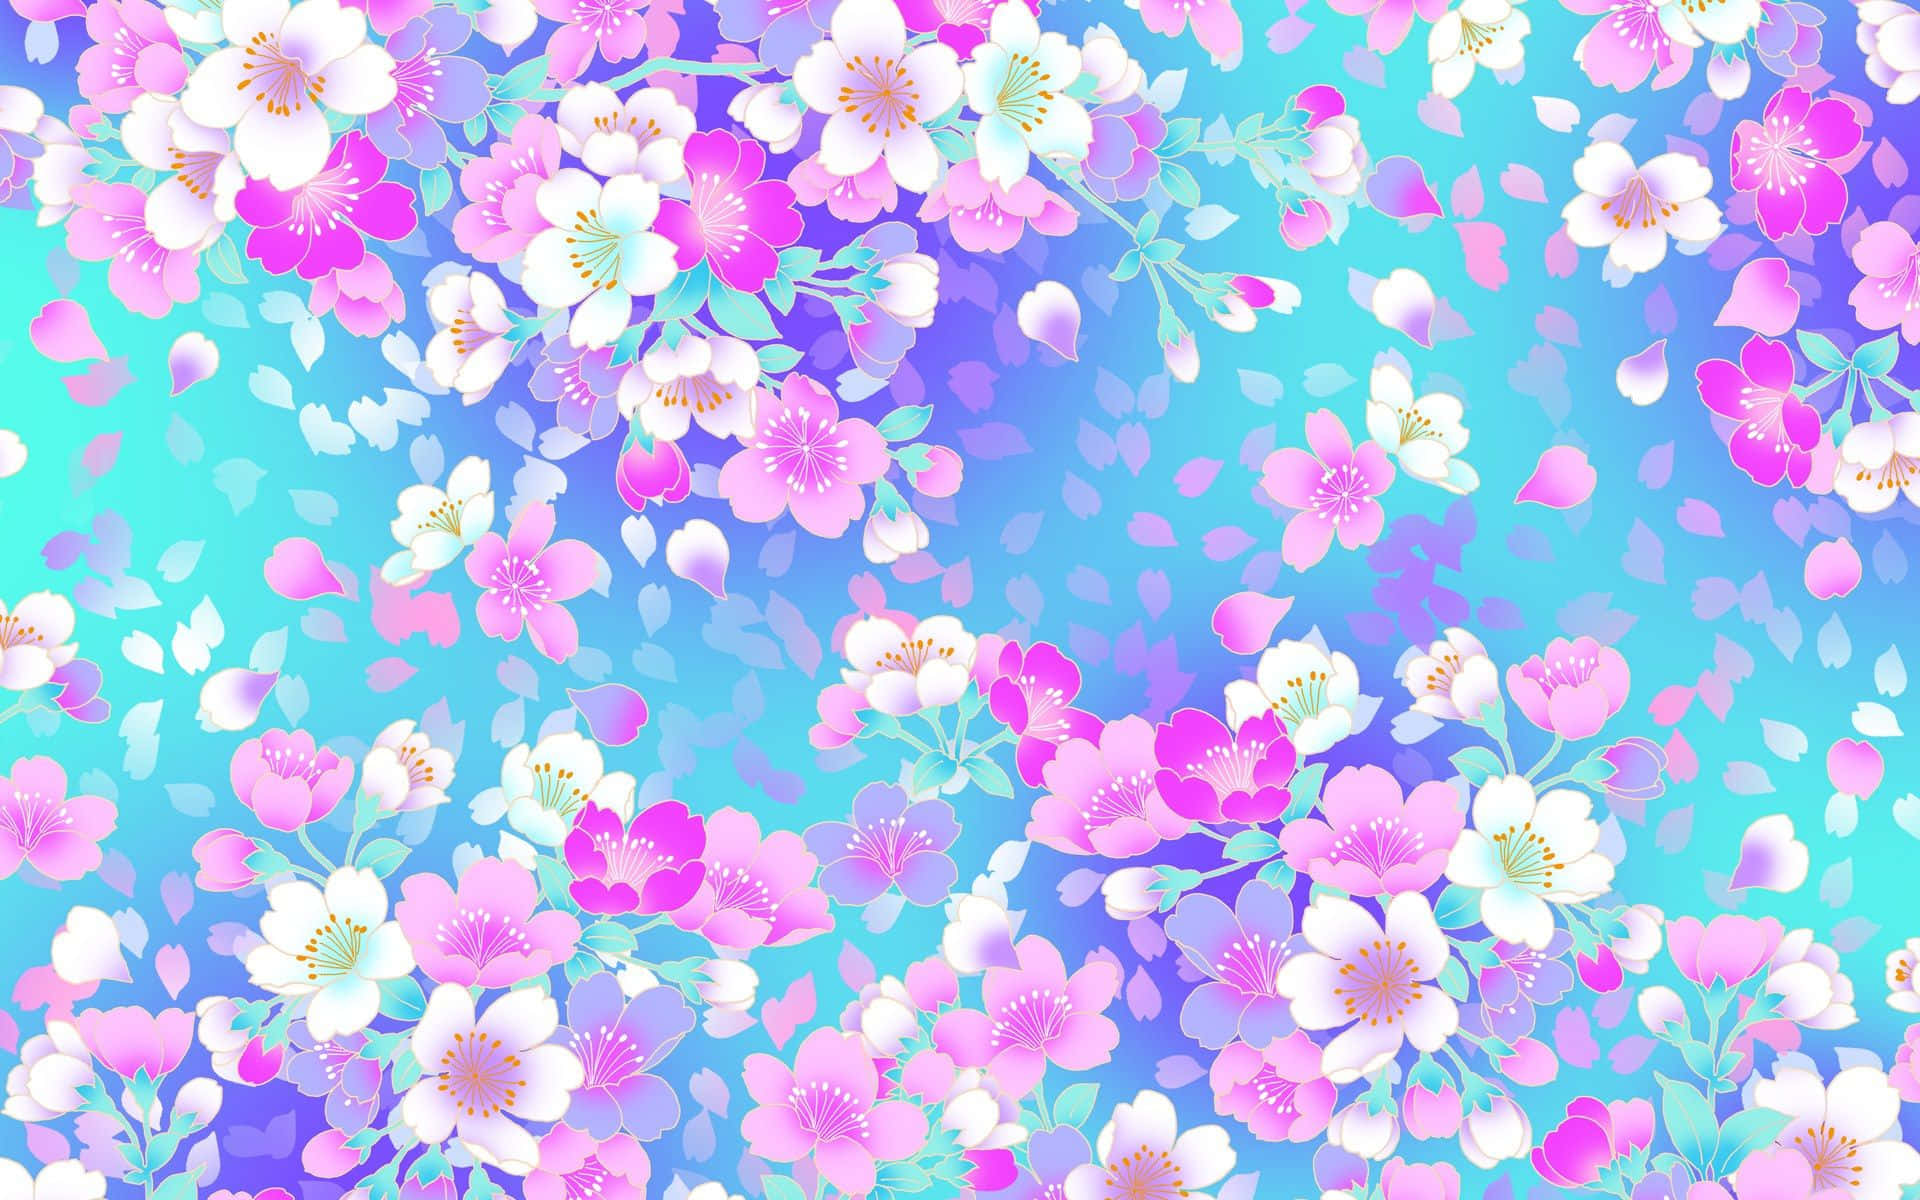 tumblr cute girly backgrounds